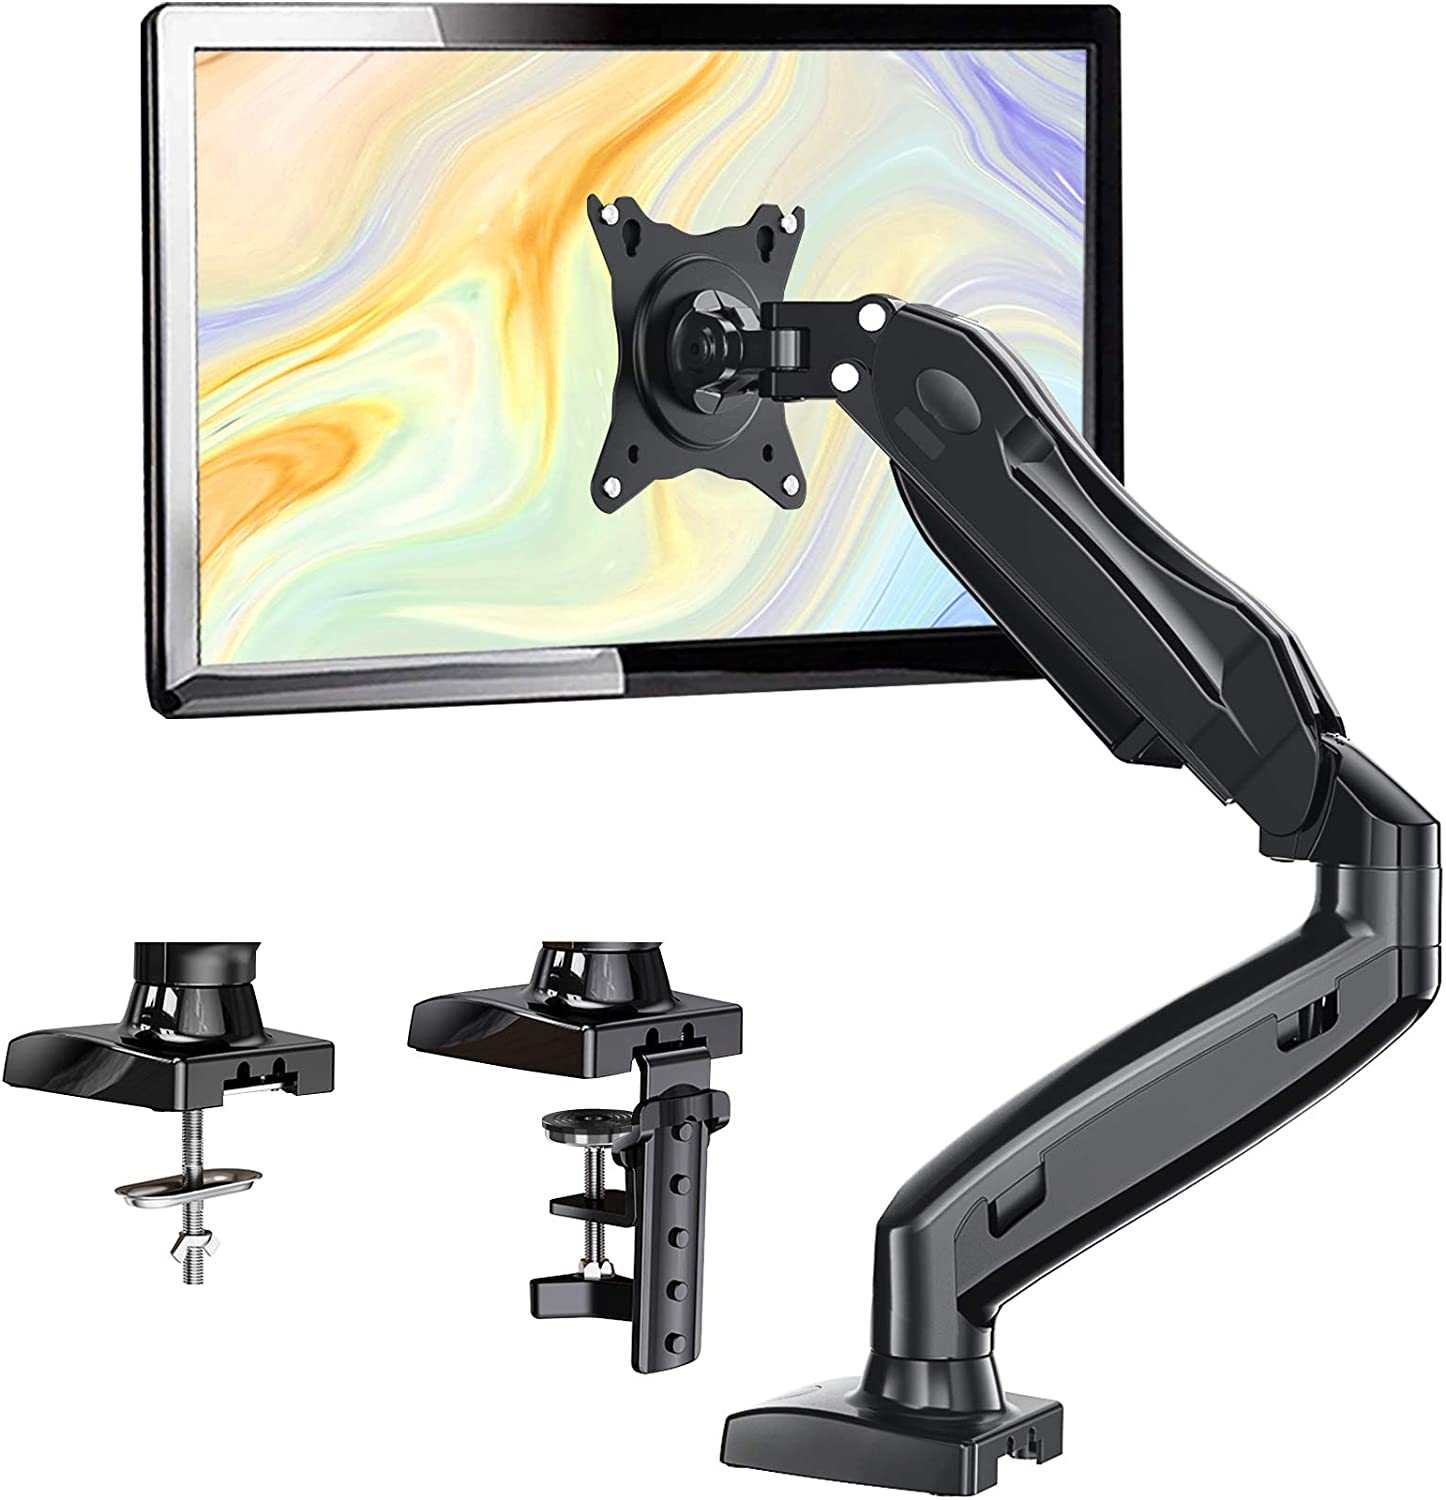 Grommet Mounting Base Gas Spring Arm Height Adjustable Monitor Desk Mount VESA 75 100 VESA Bracket for 17 to 32 Inch Computer Screen- Holds up to 17.6lbs with Clamp Dual Monitor Mount Stand 